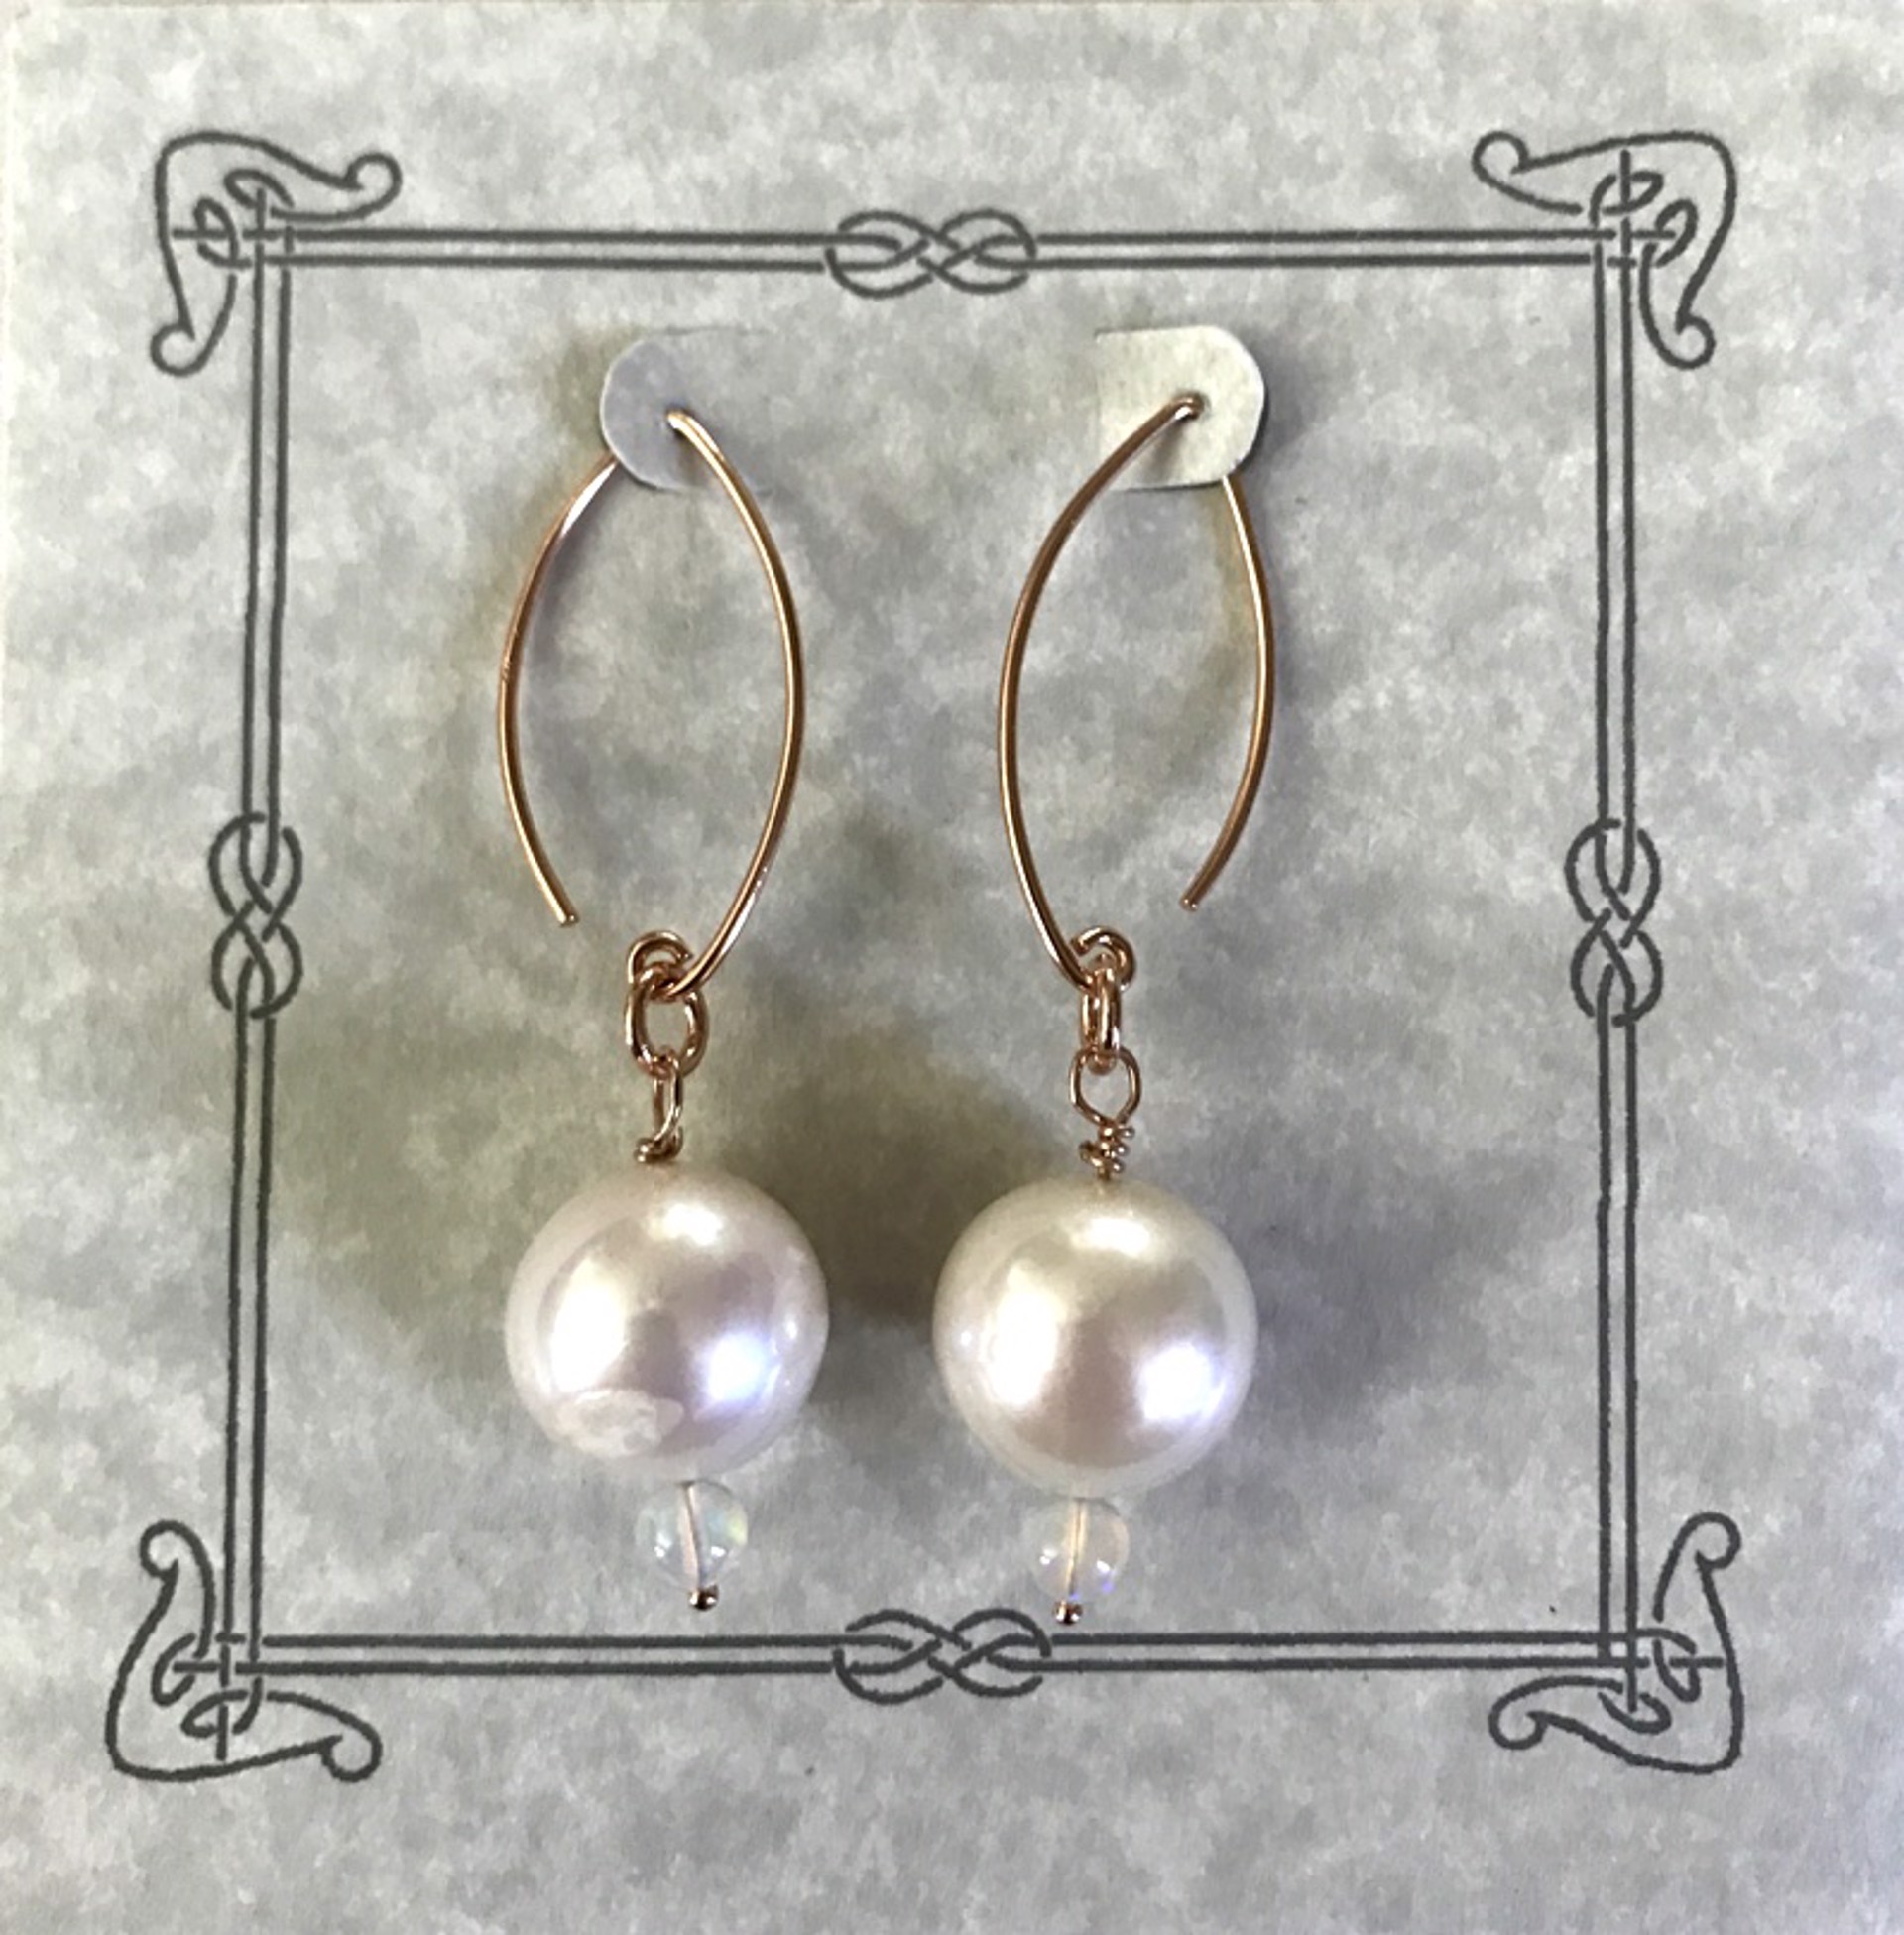 Earring - Freshwater Pearl & Opal With Rose Gold Vermeil   #8018 by Bonnie Jaus